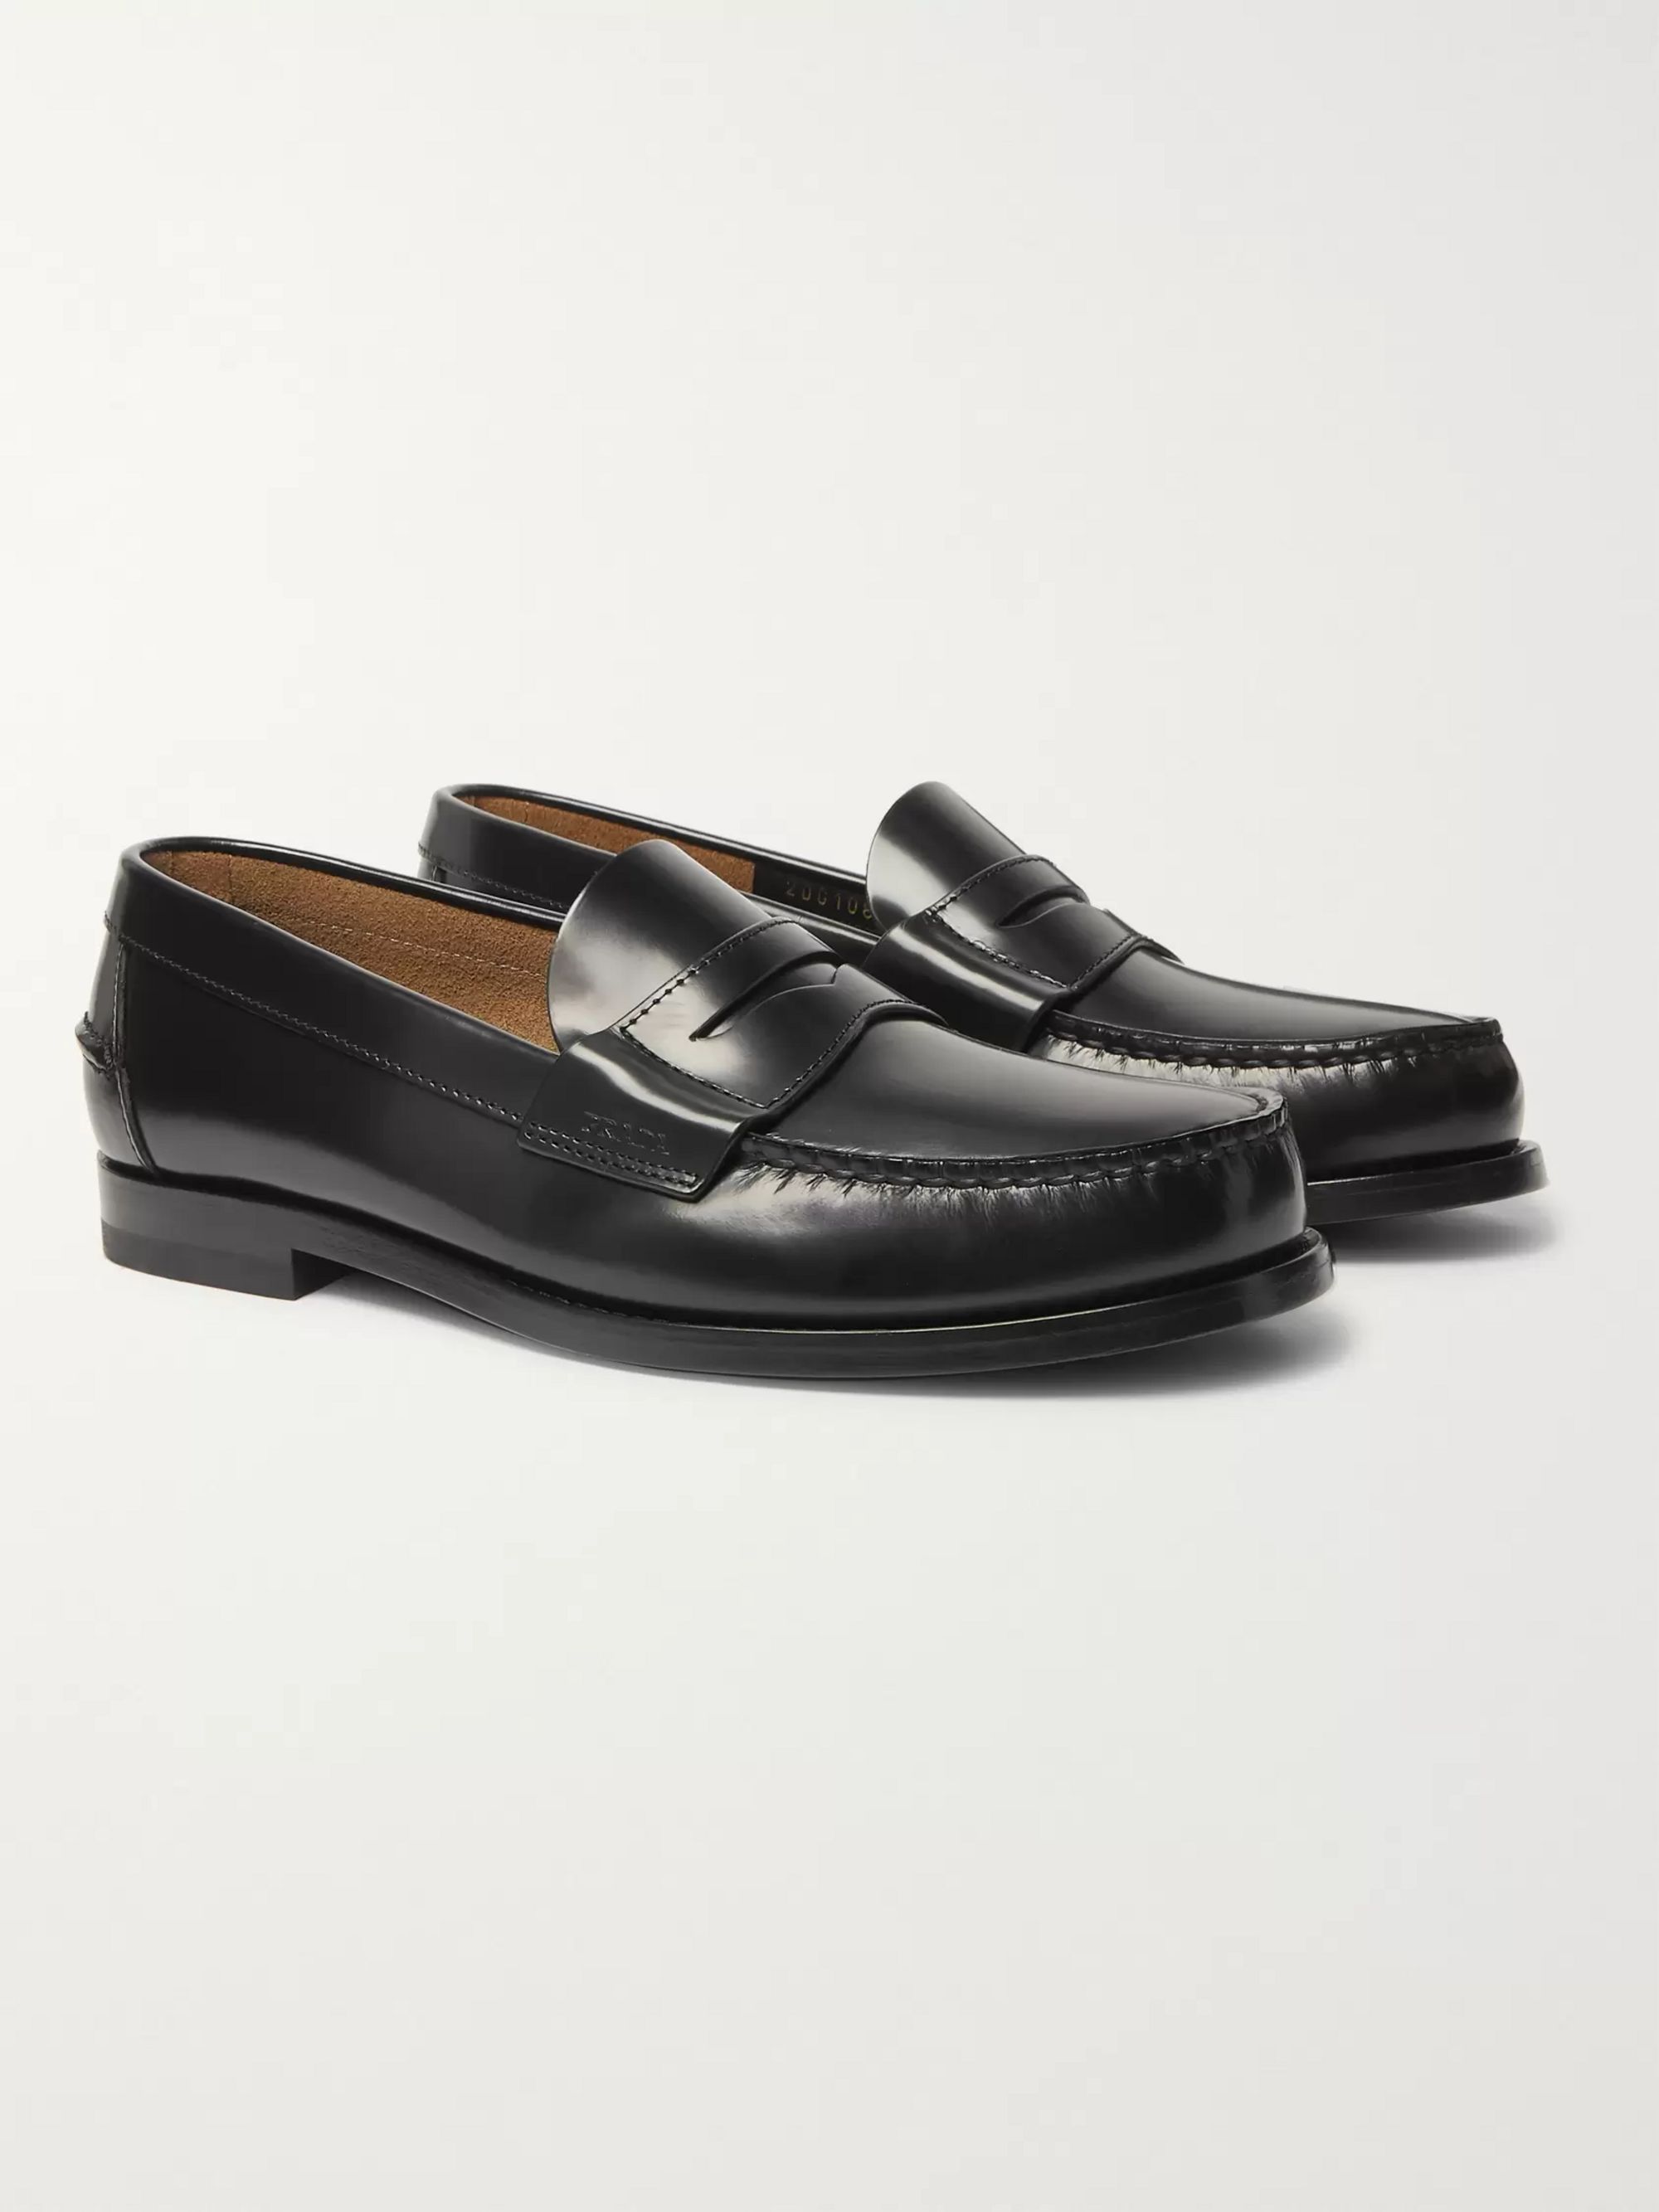 Black Spazzolato Leather Penny Loafers 